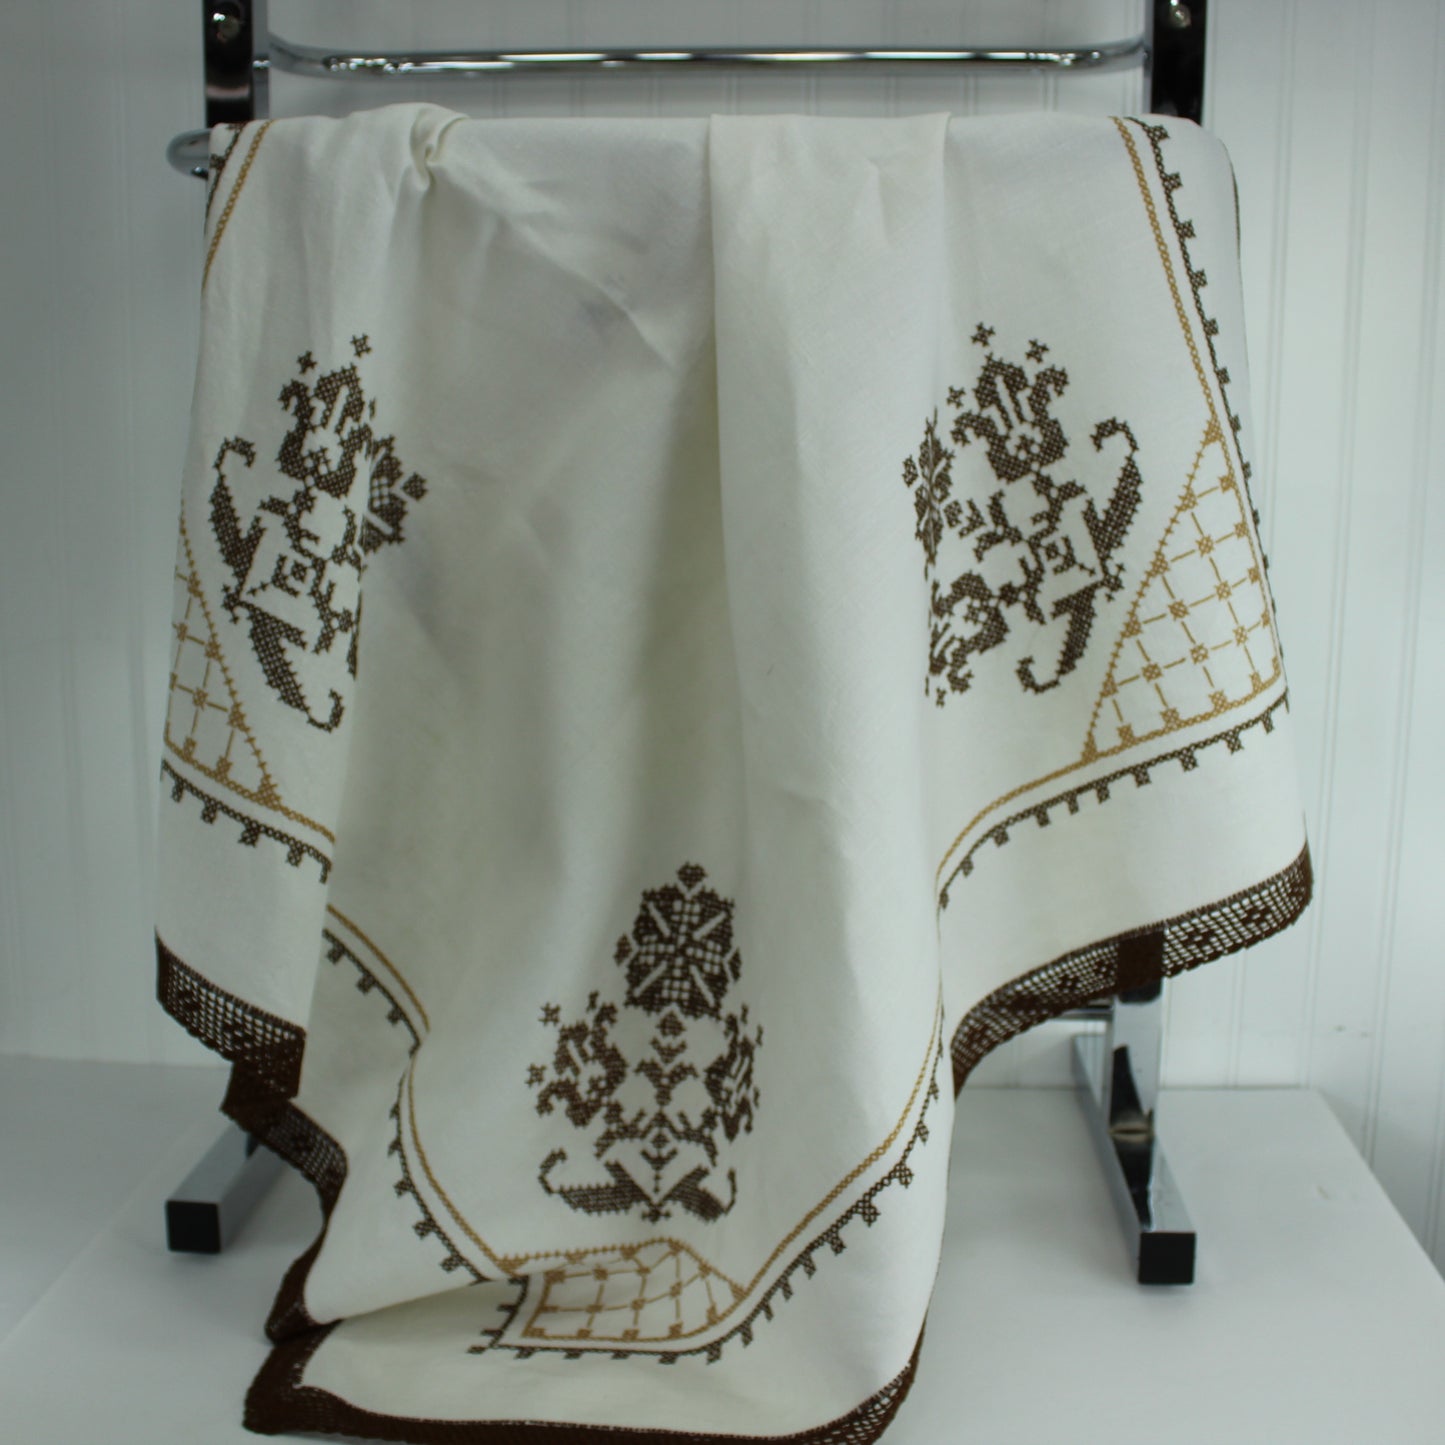 Brown Cross Stitch Embroidered Tablecloth Heavy White Linen Crochet Edges designs all corners